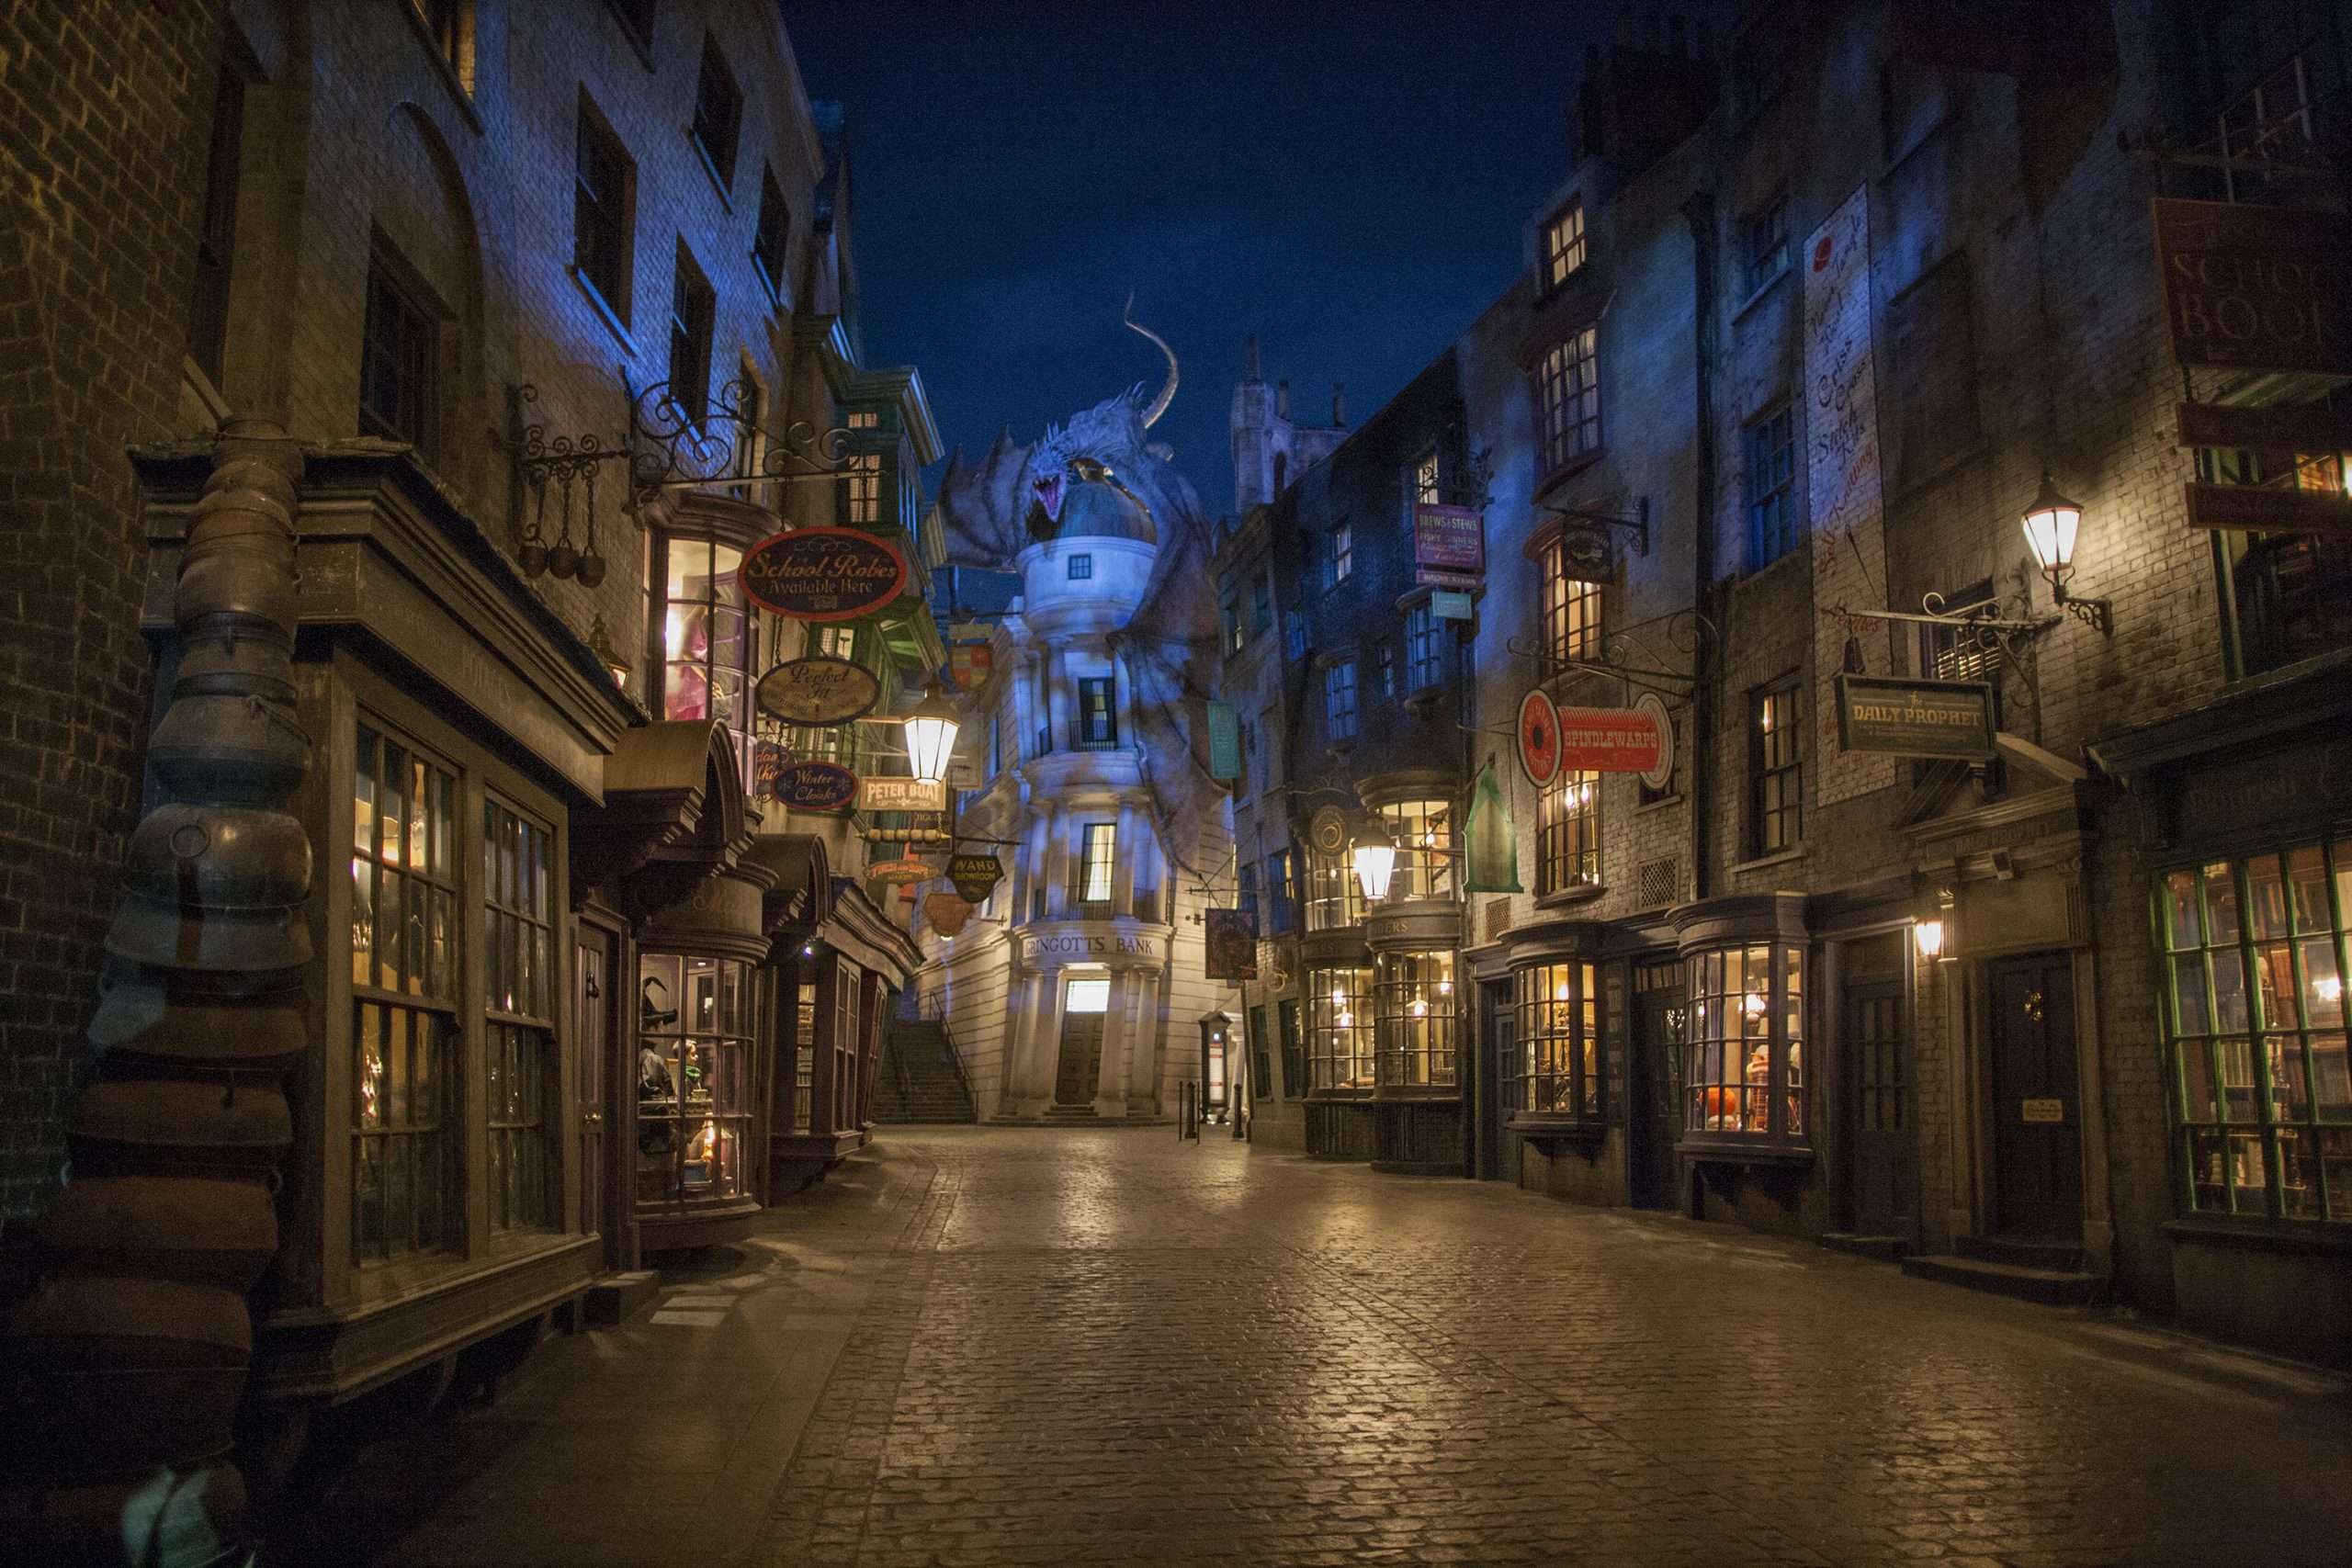 wizarding world of harry potter is opening at universal scaled